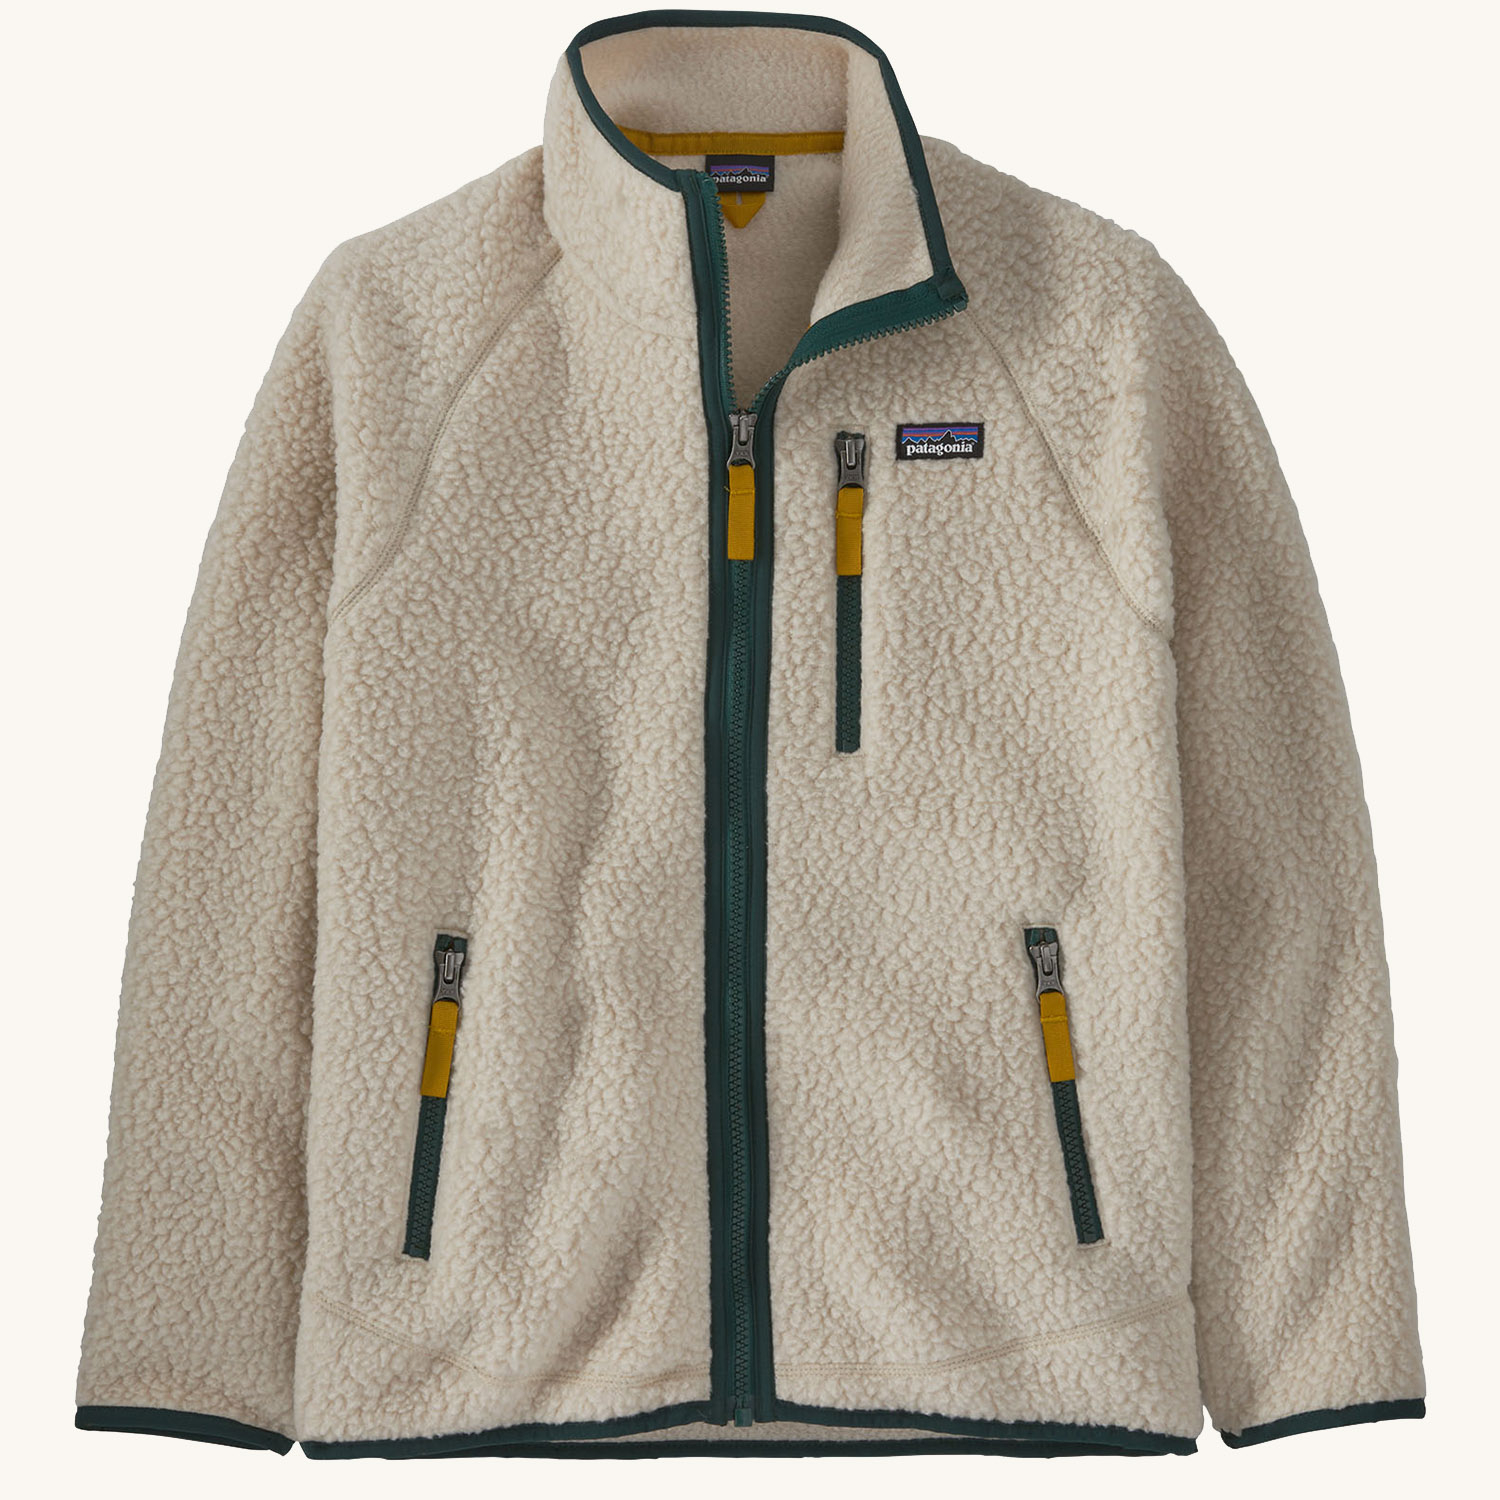 https://p7014794.vo.llnwd.net/e1/media/catalog/product/cache/816946f58e02fdcf659ceb75cac88327/p/a/patagonia-kids-retro-pile-recycled-fleece-jacket-dark-natural-northern-green.jpg